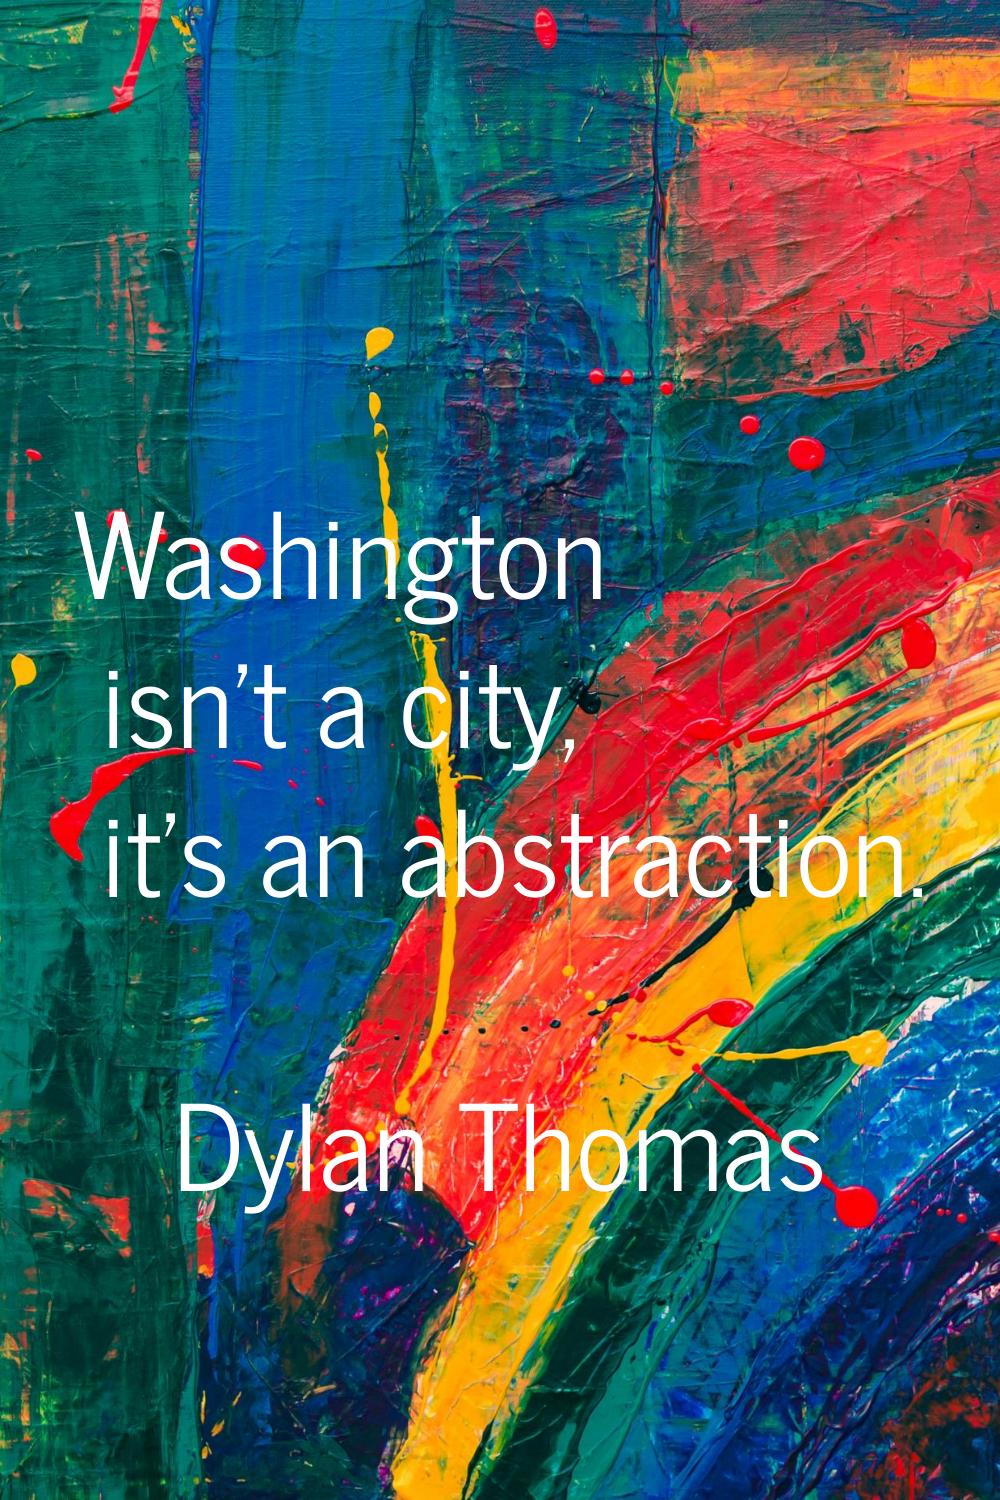 Washington isn't a city, it's an abstraction.